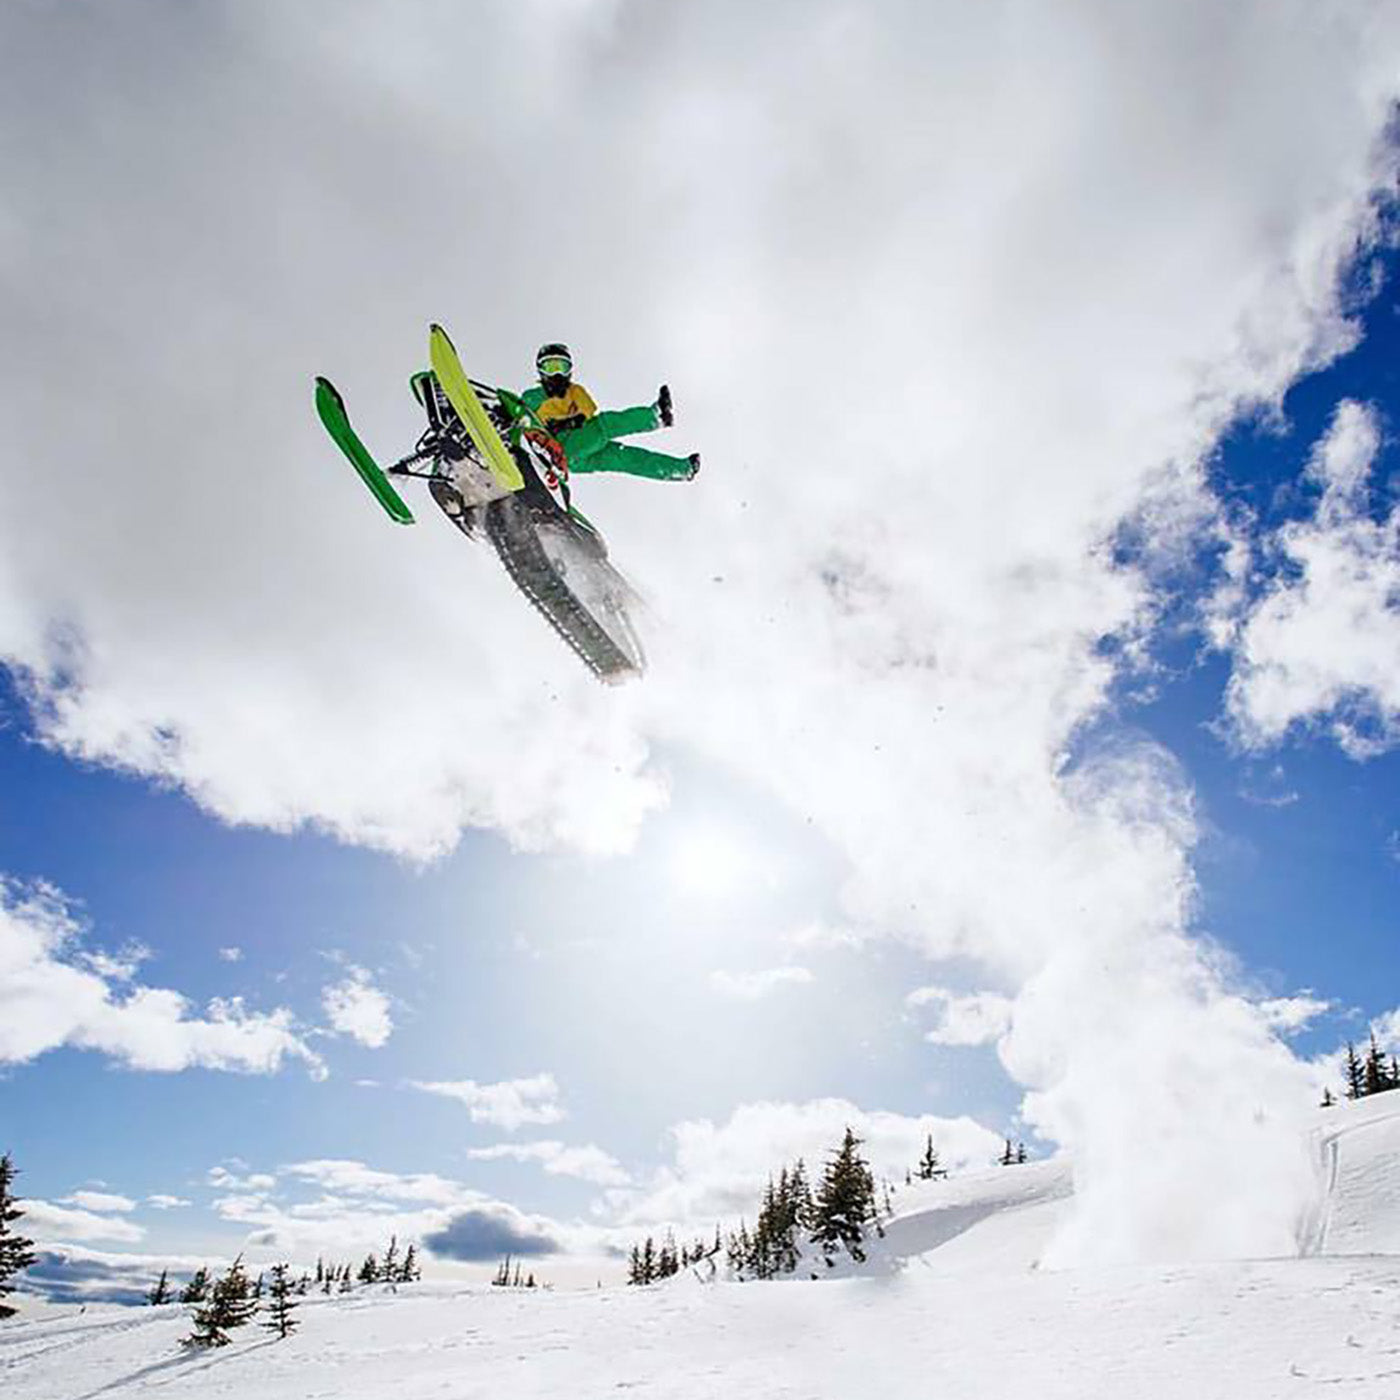 Brett Turcotte midair with a green and a lime green pair of C&A Pro skis with black handles